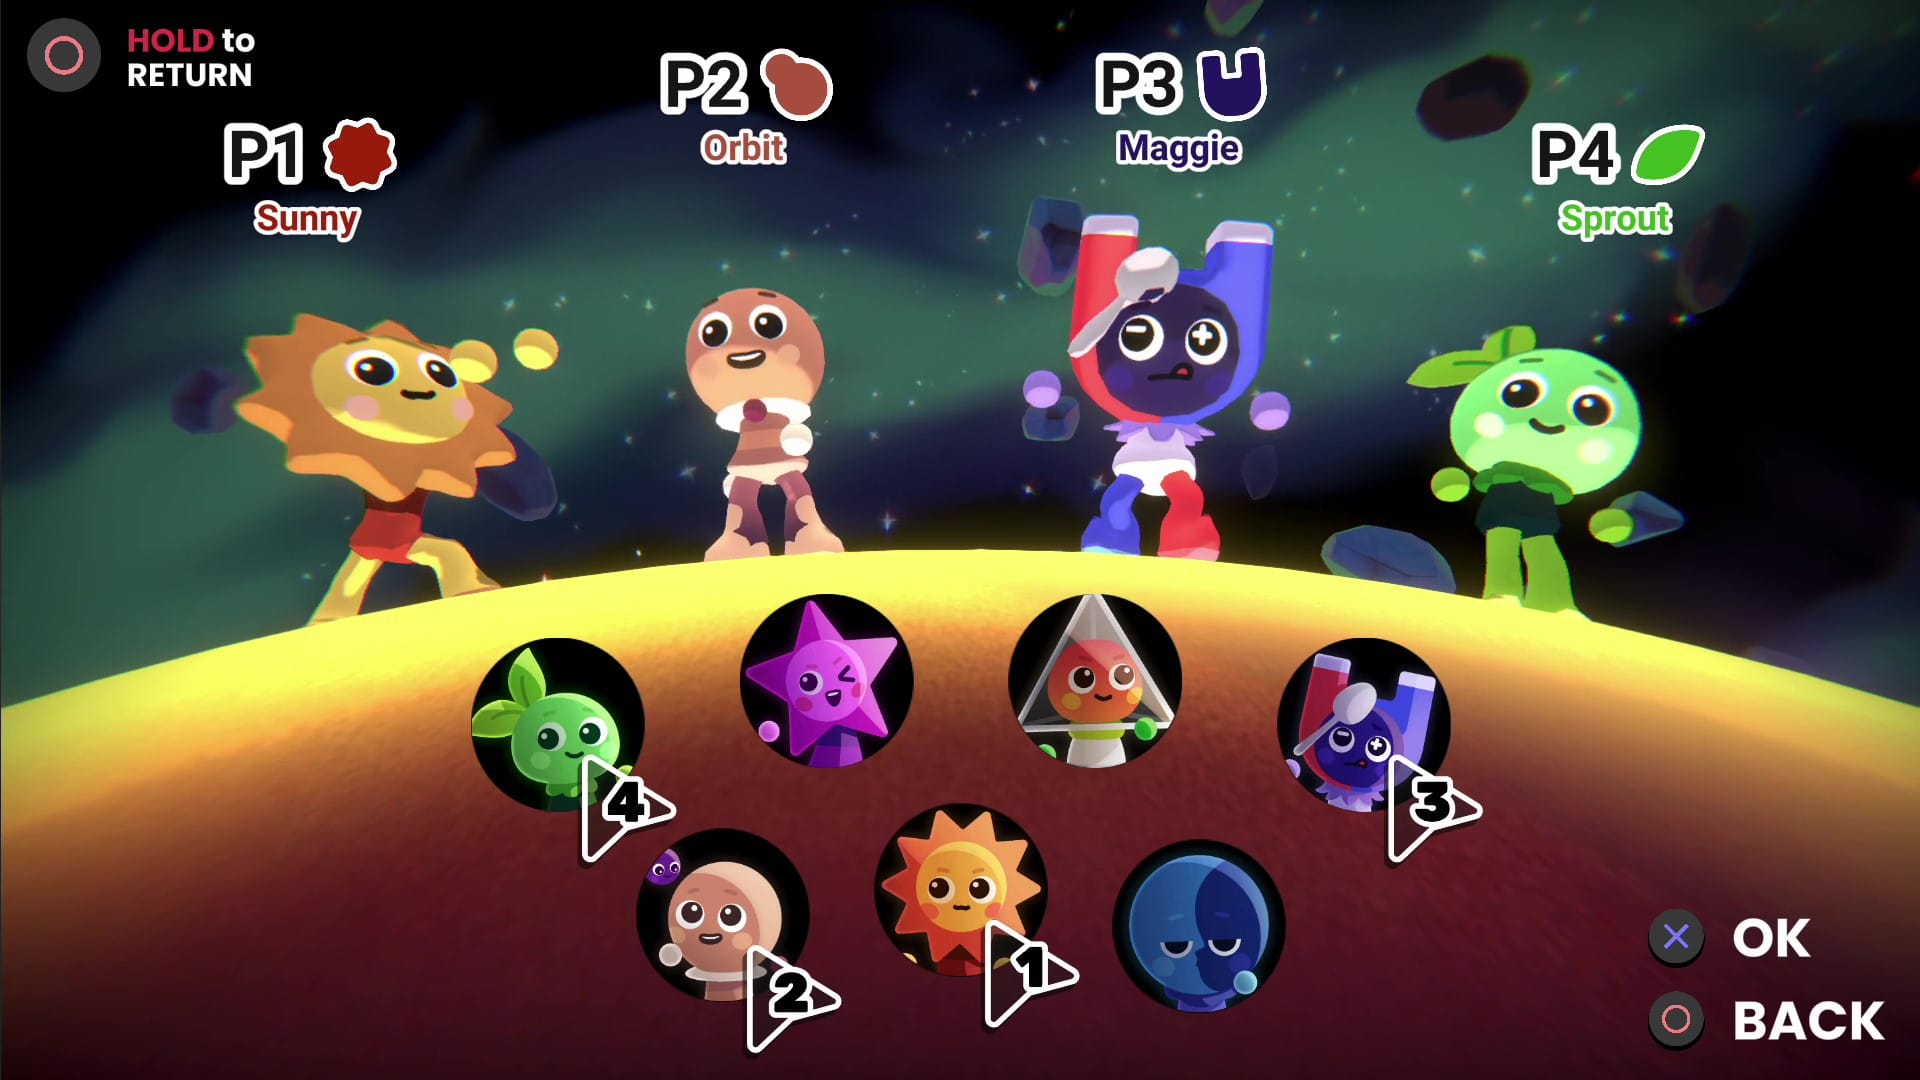 Four sprites selected on the game's main menu, a planet with asteroids in the background.